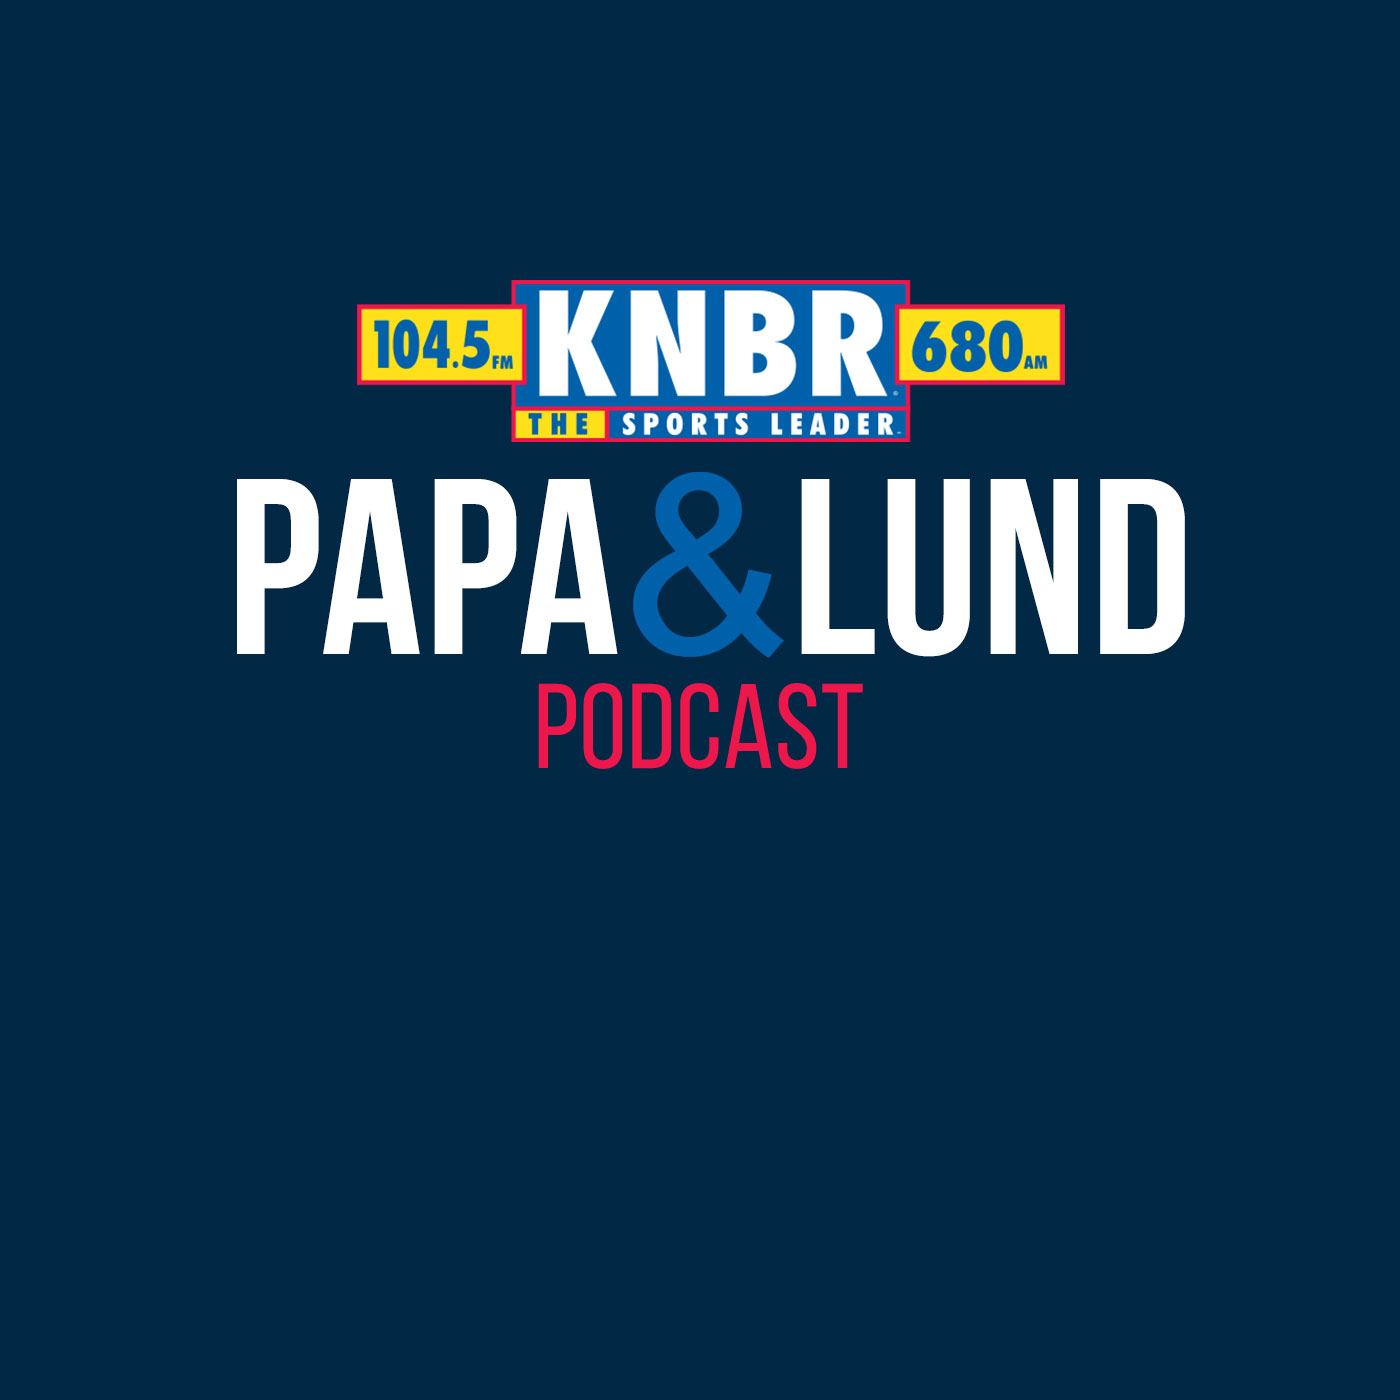 4-4 George Kontos joins Papa & Lund to discuss the Giants up and down nature of their offense and what it will look like once everything stabilizes